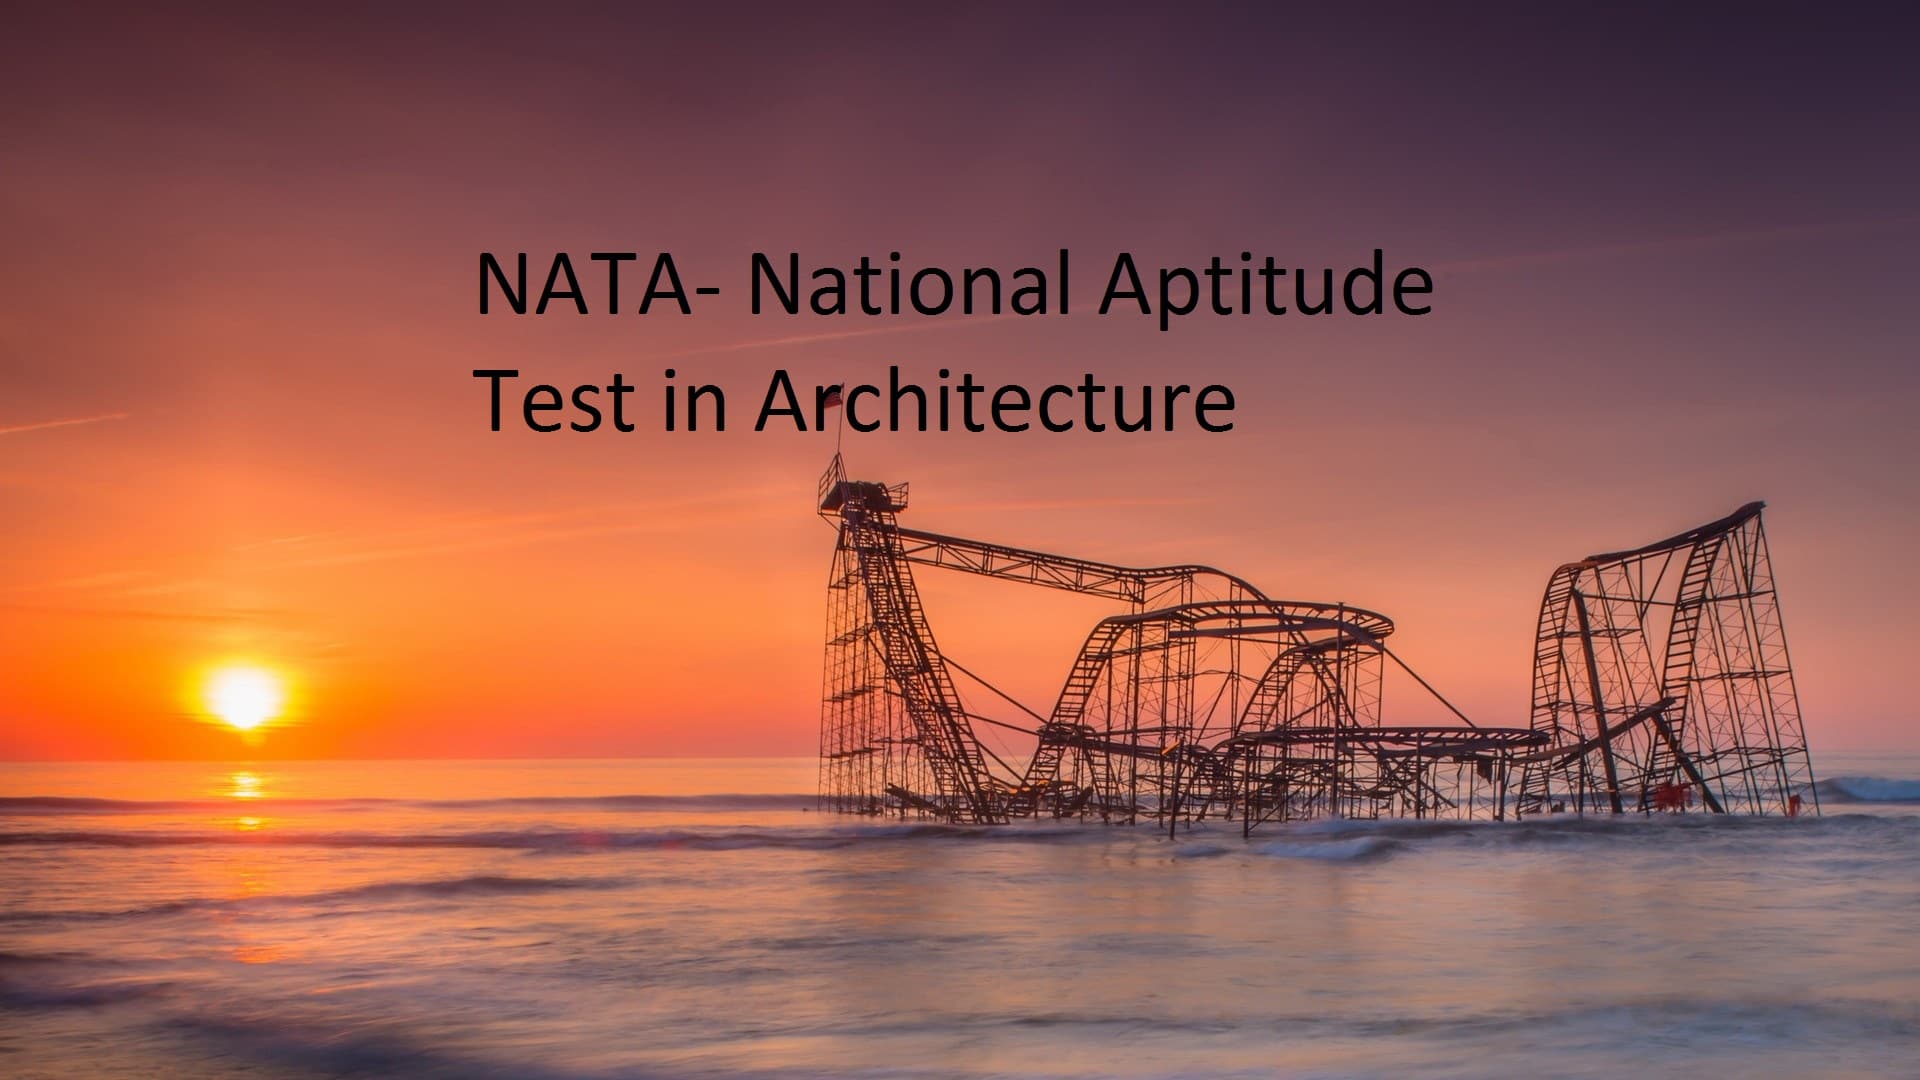 About National Aptitude Test